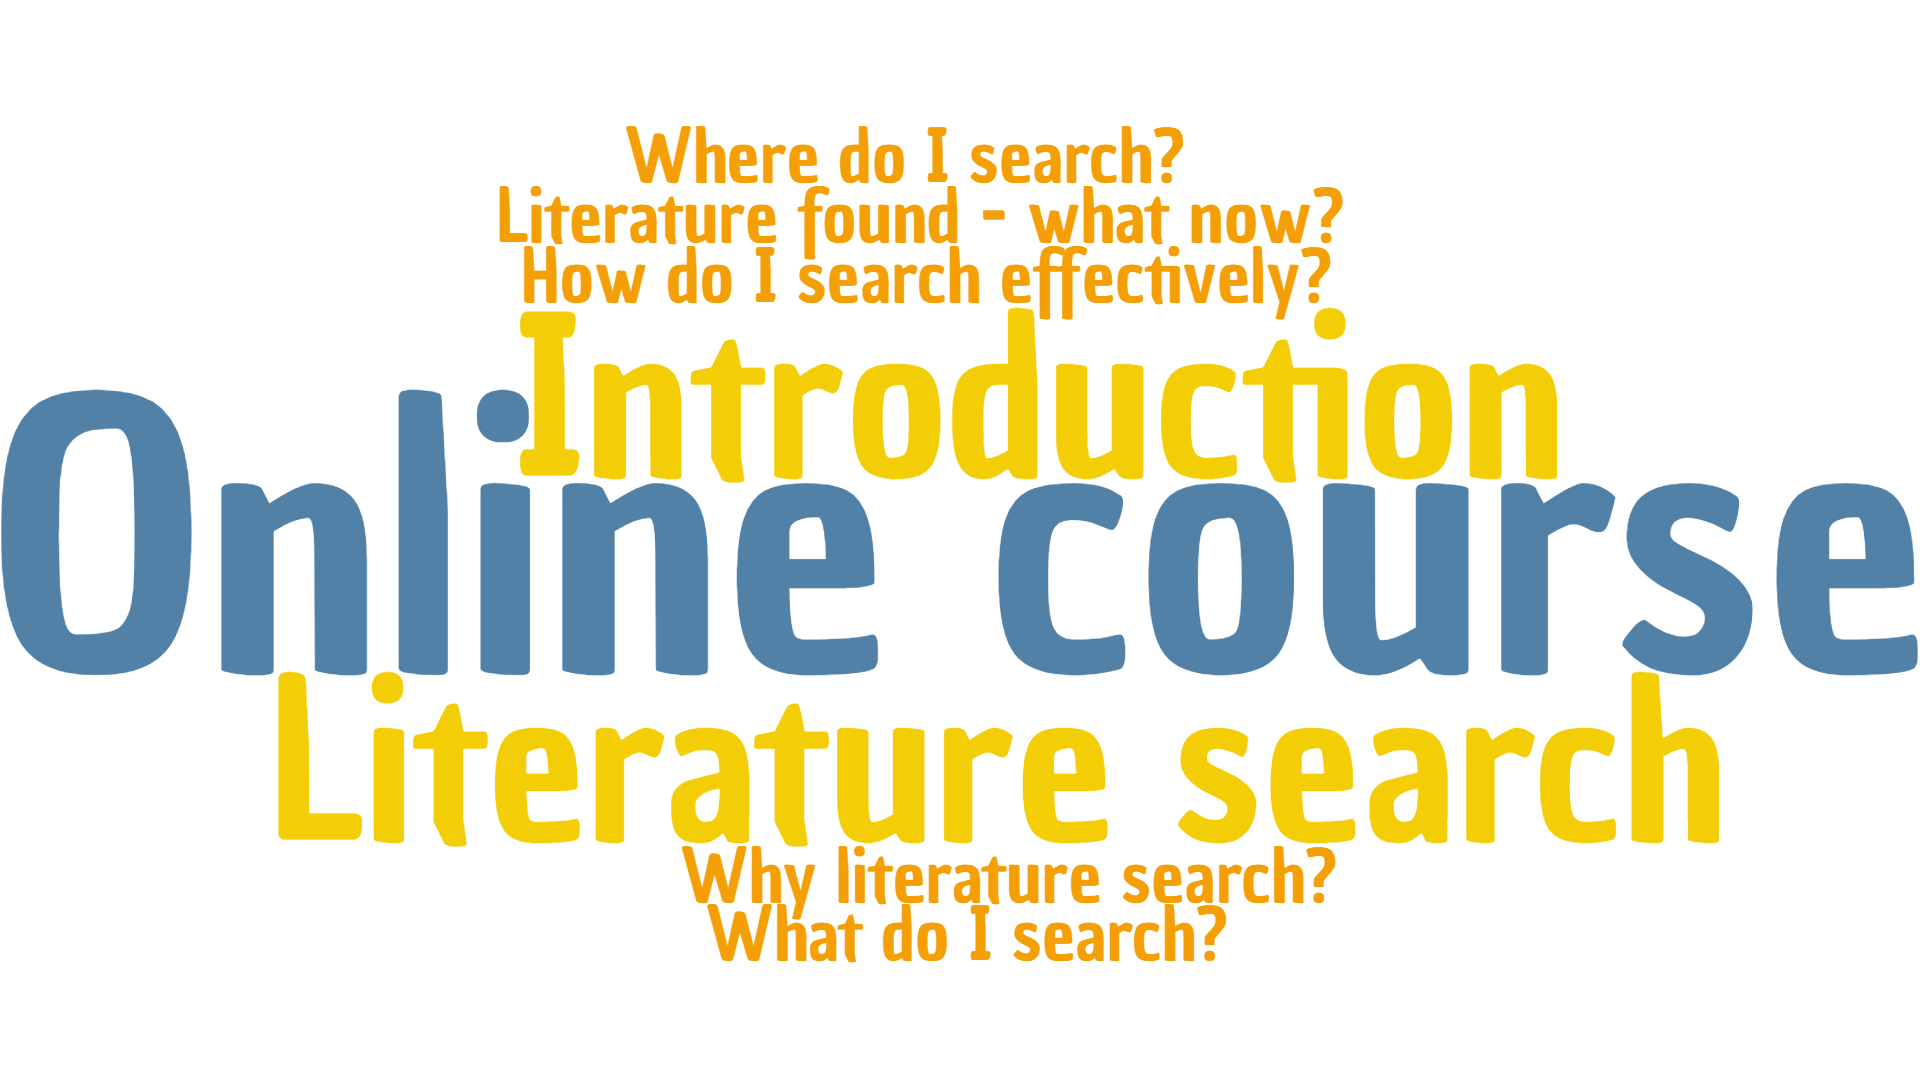 A wordcloud in blue, yellow, and orange colours. It contains the following words and phrases: Online course (in large font, in the centre), introduction, literature search, literature found - what now?, how do I search effectively?, what do I search?, why literature search?, where do I search?.